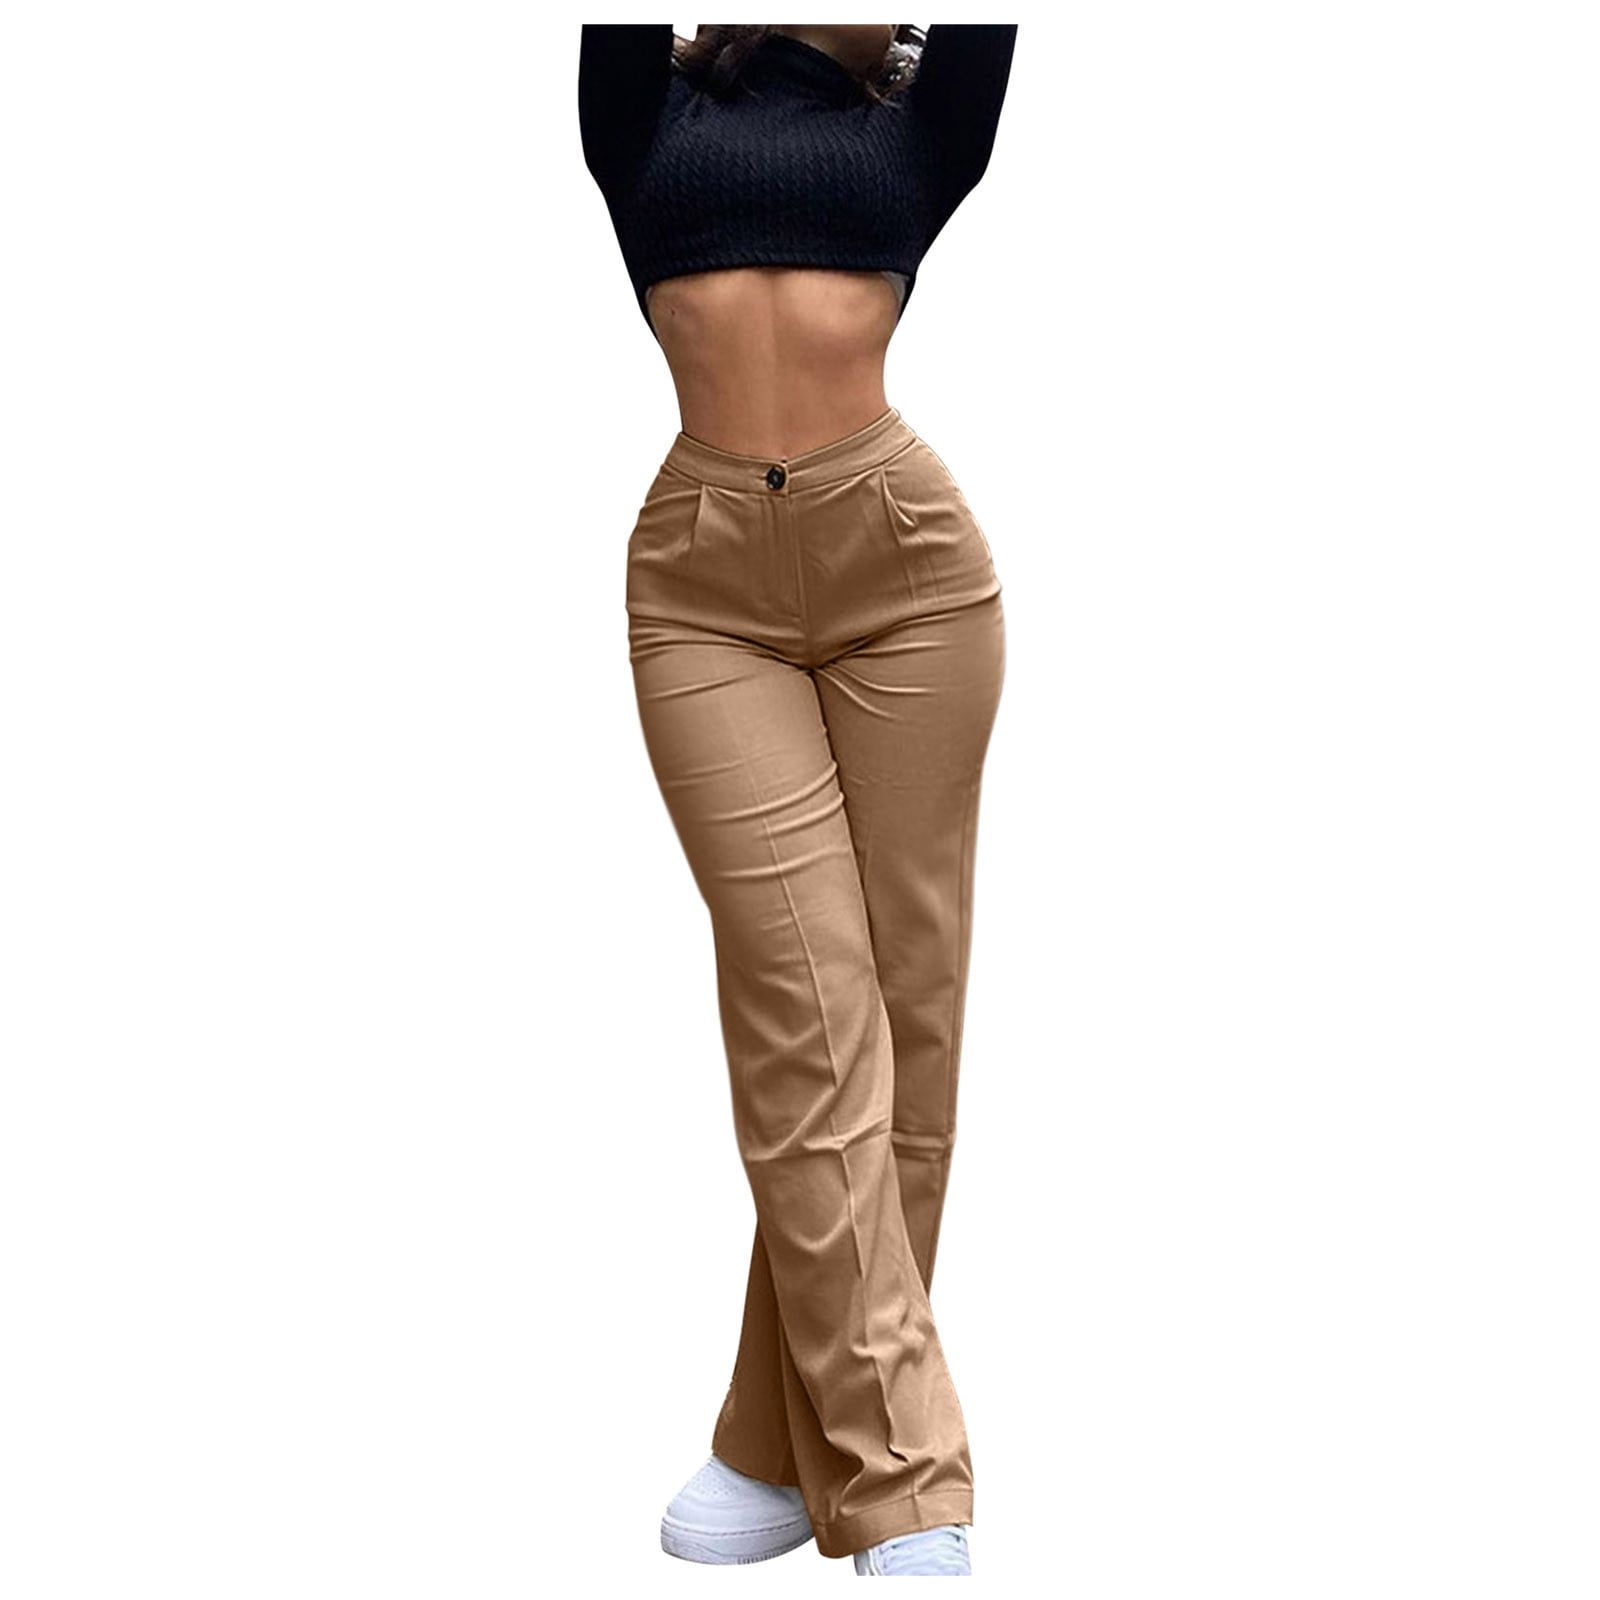 Professional Suit Pants Women Straight Black Work Pants Spring and Autumn  Bank Hotel Skinny Pants Loose Drooping Casual Long Pants